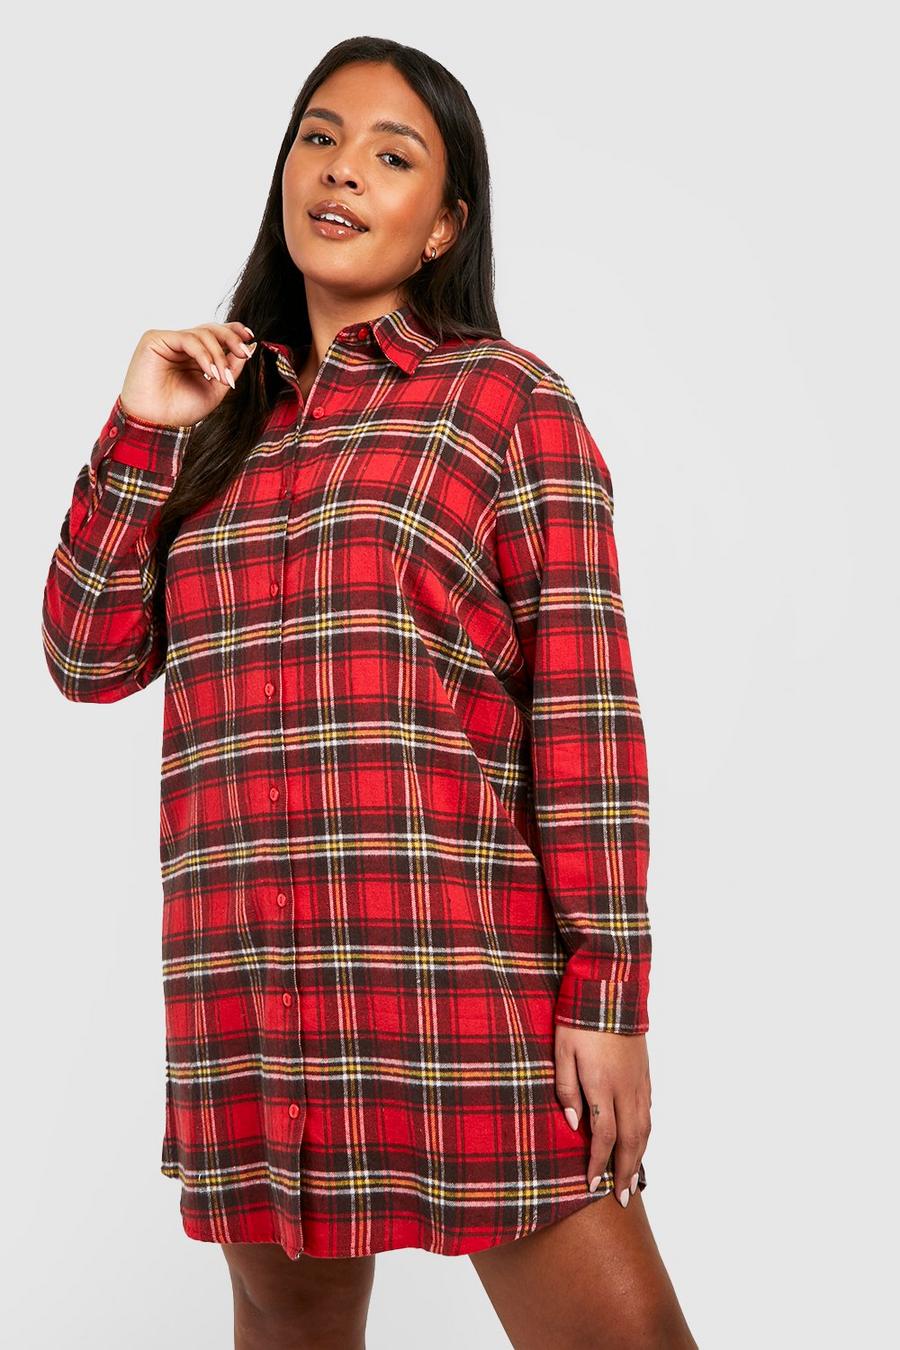 UnemploymentClothing Cropped Embellished Flannel